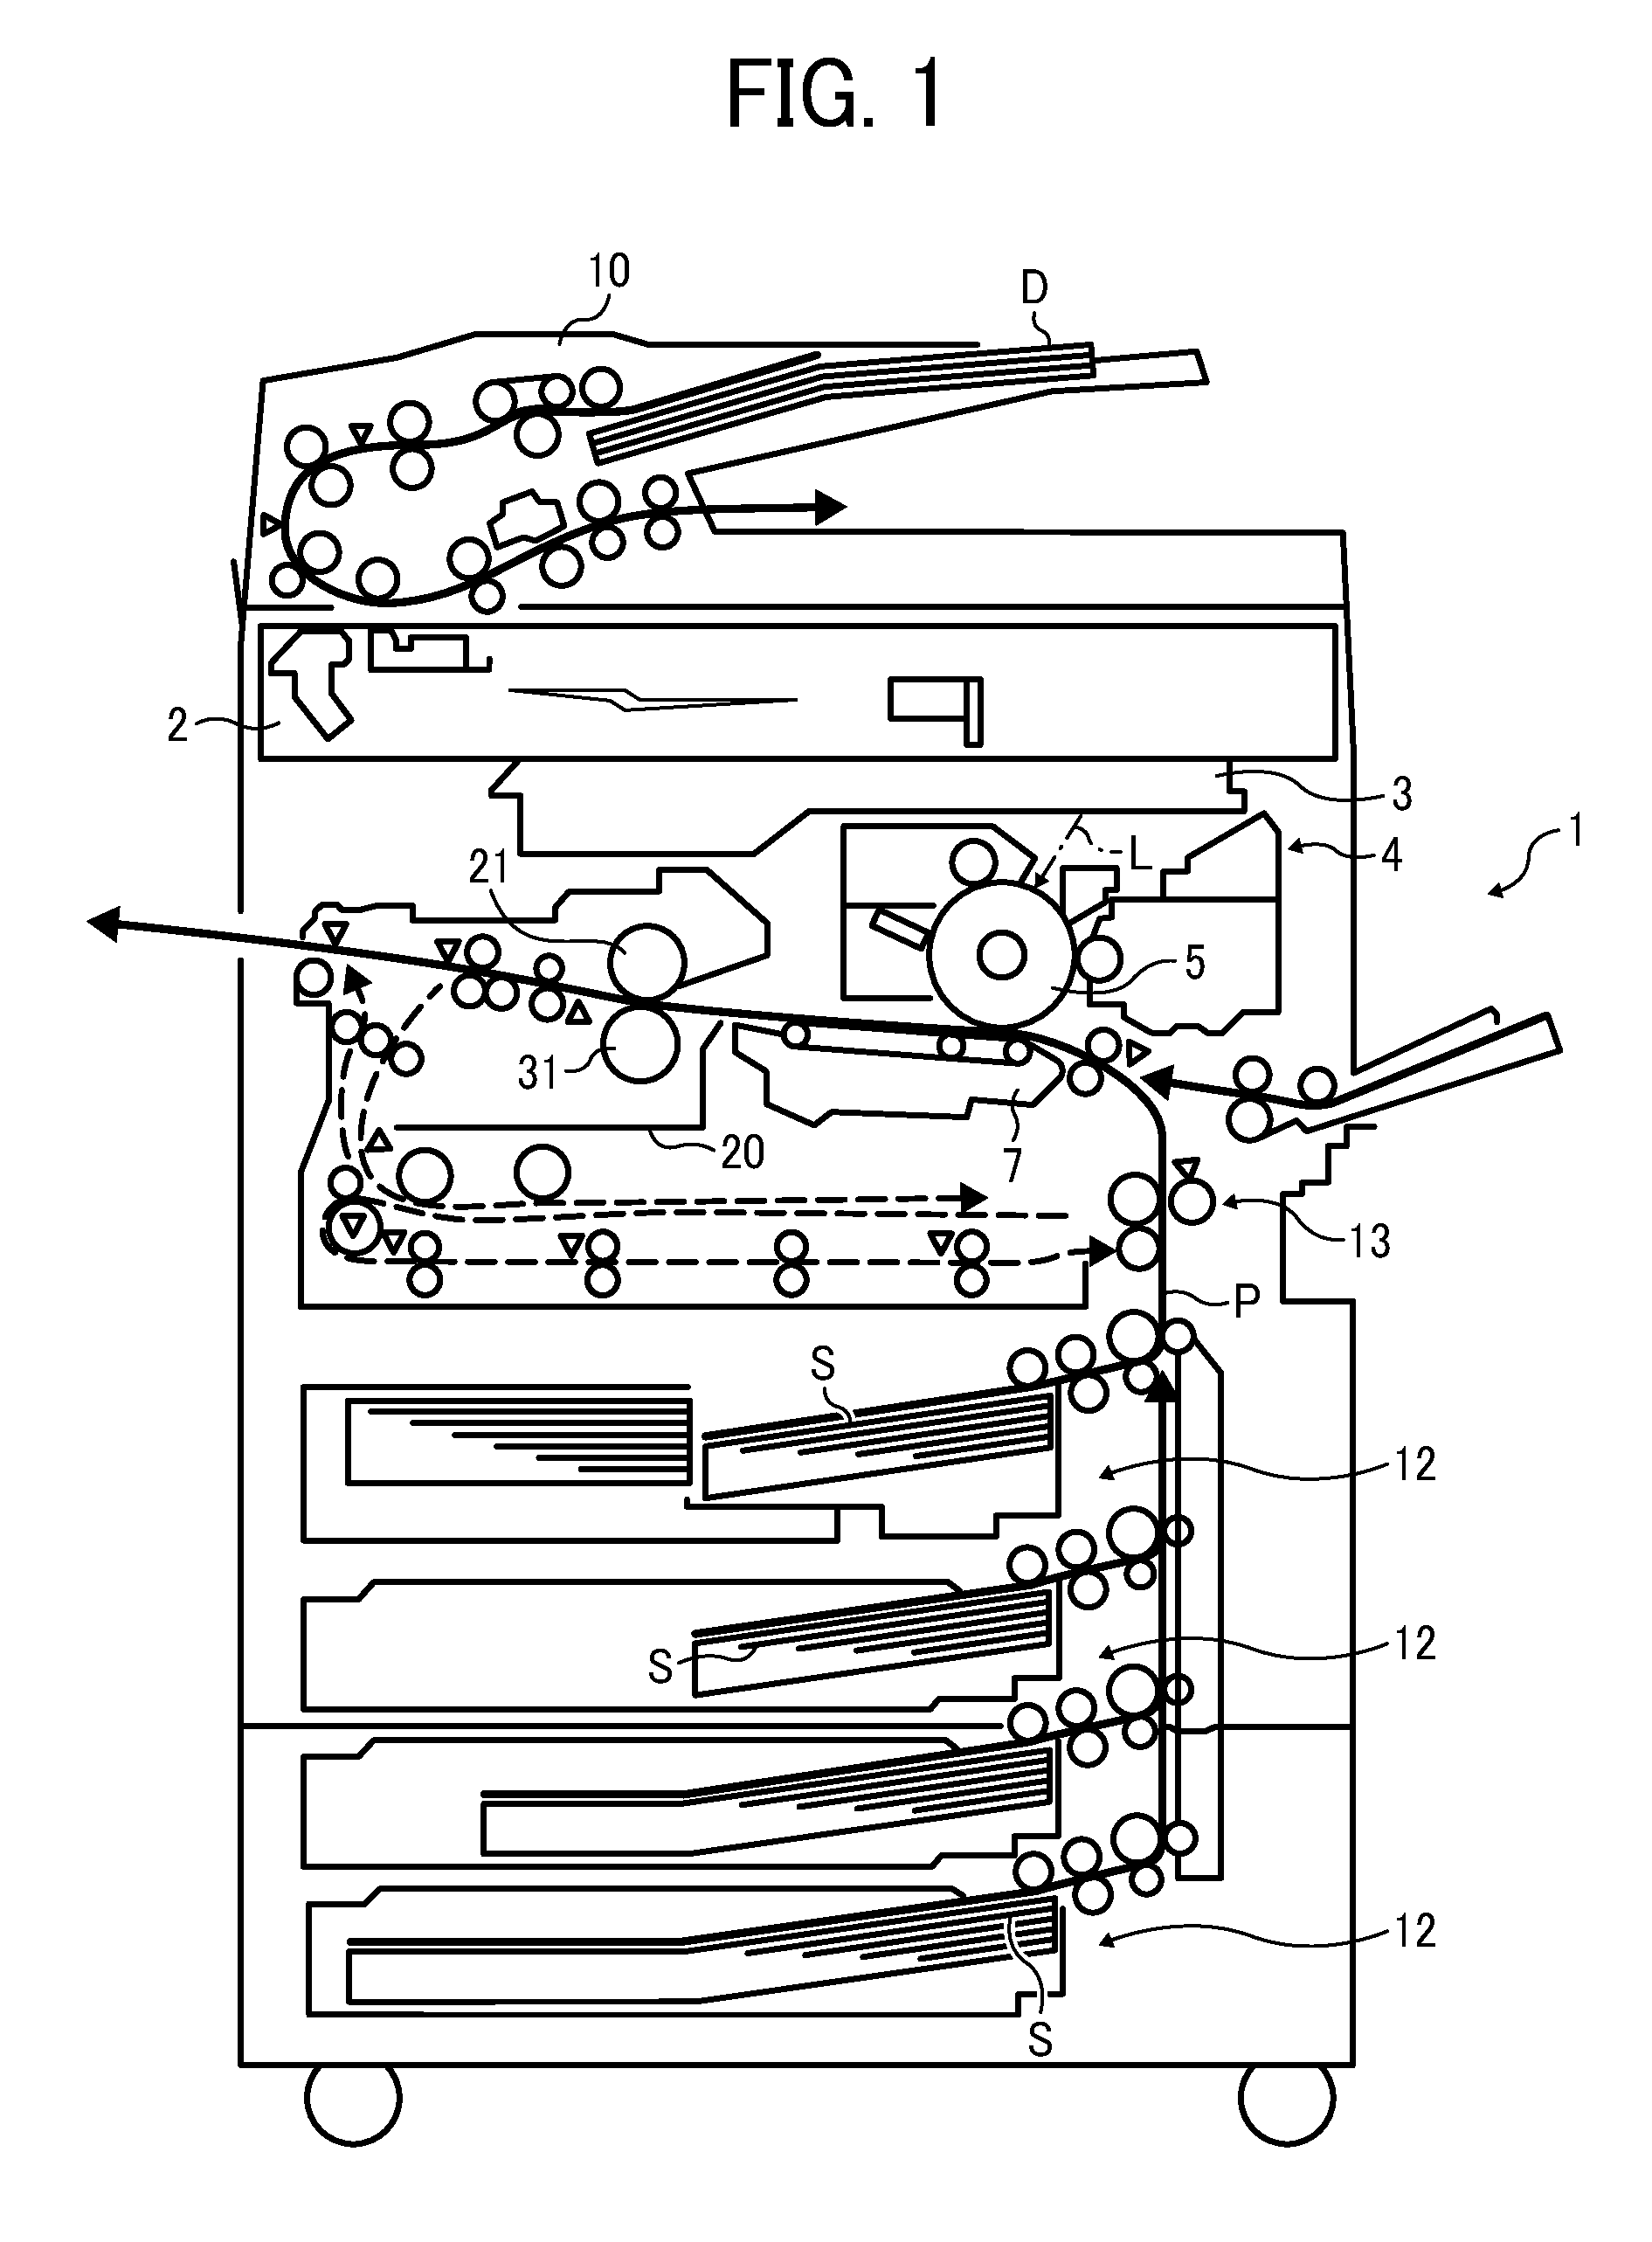 Fixing device, image forming apparatus, and heater control method